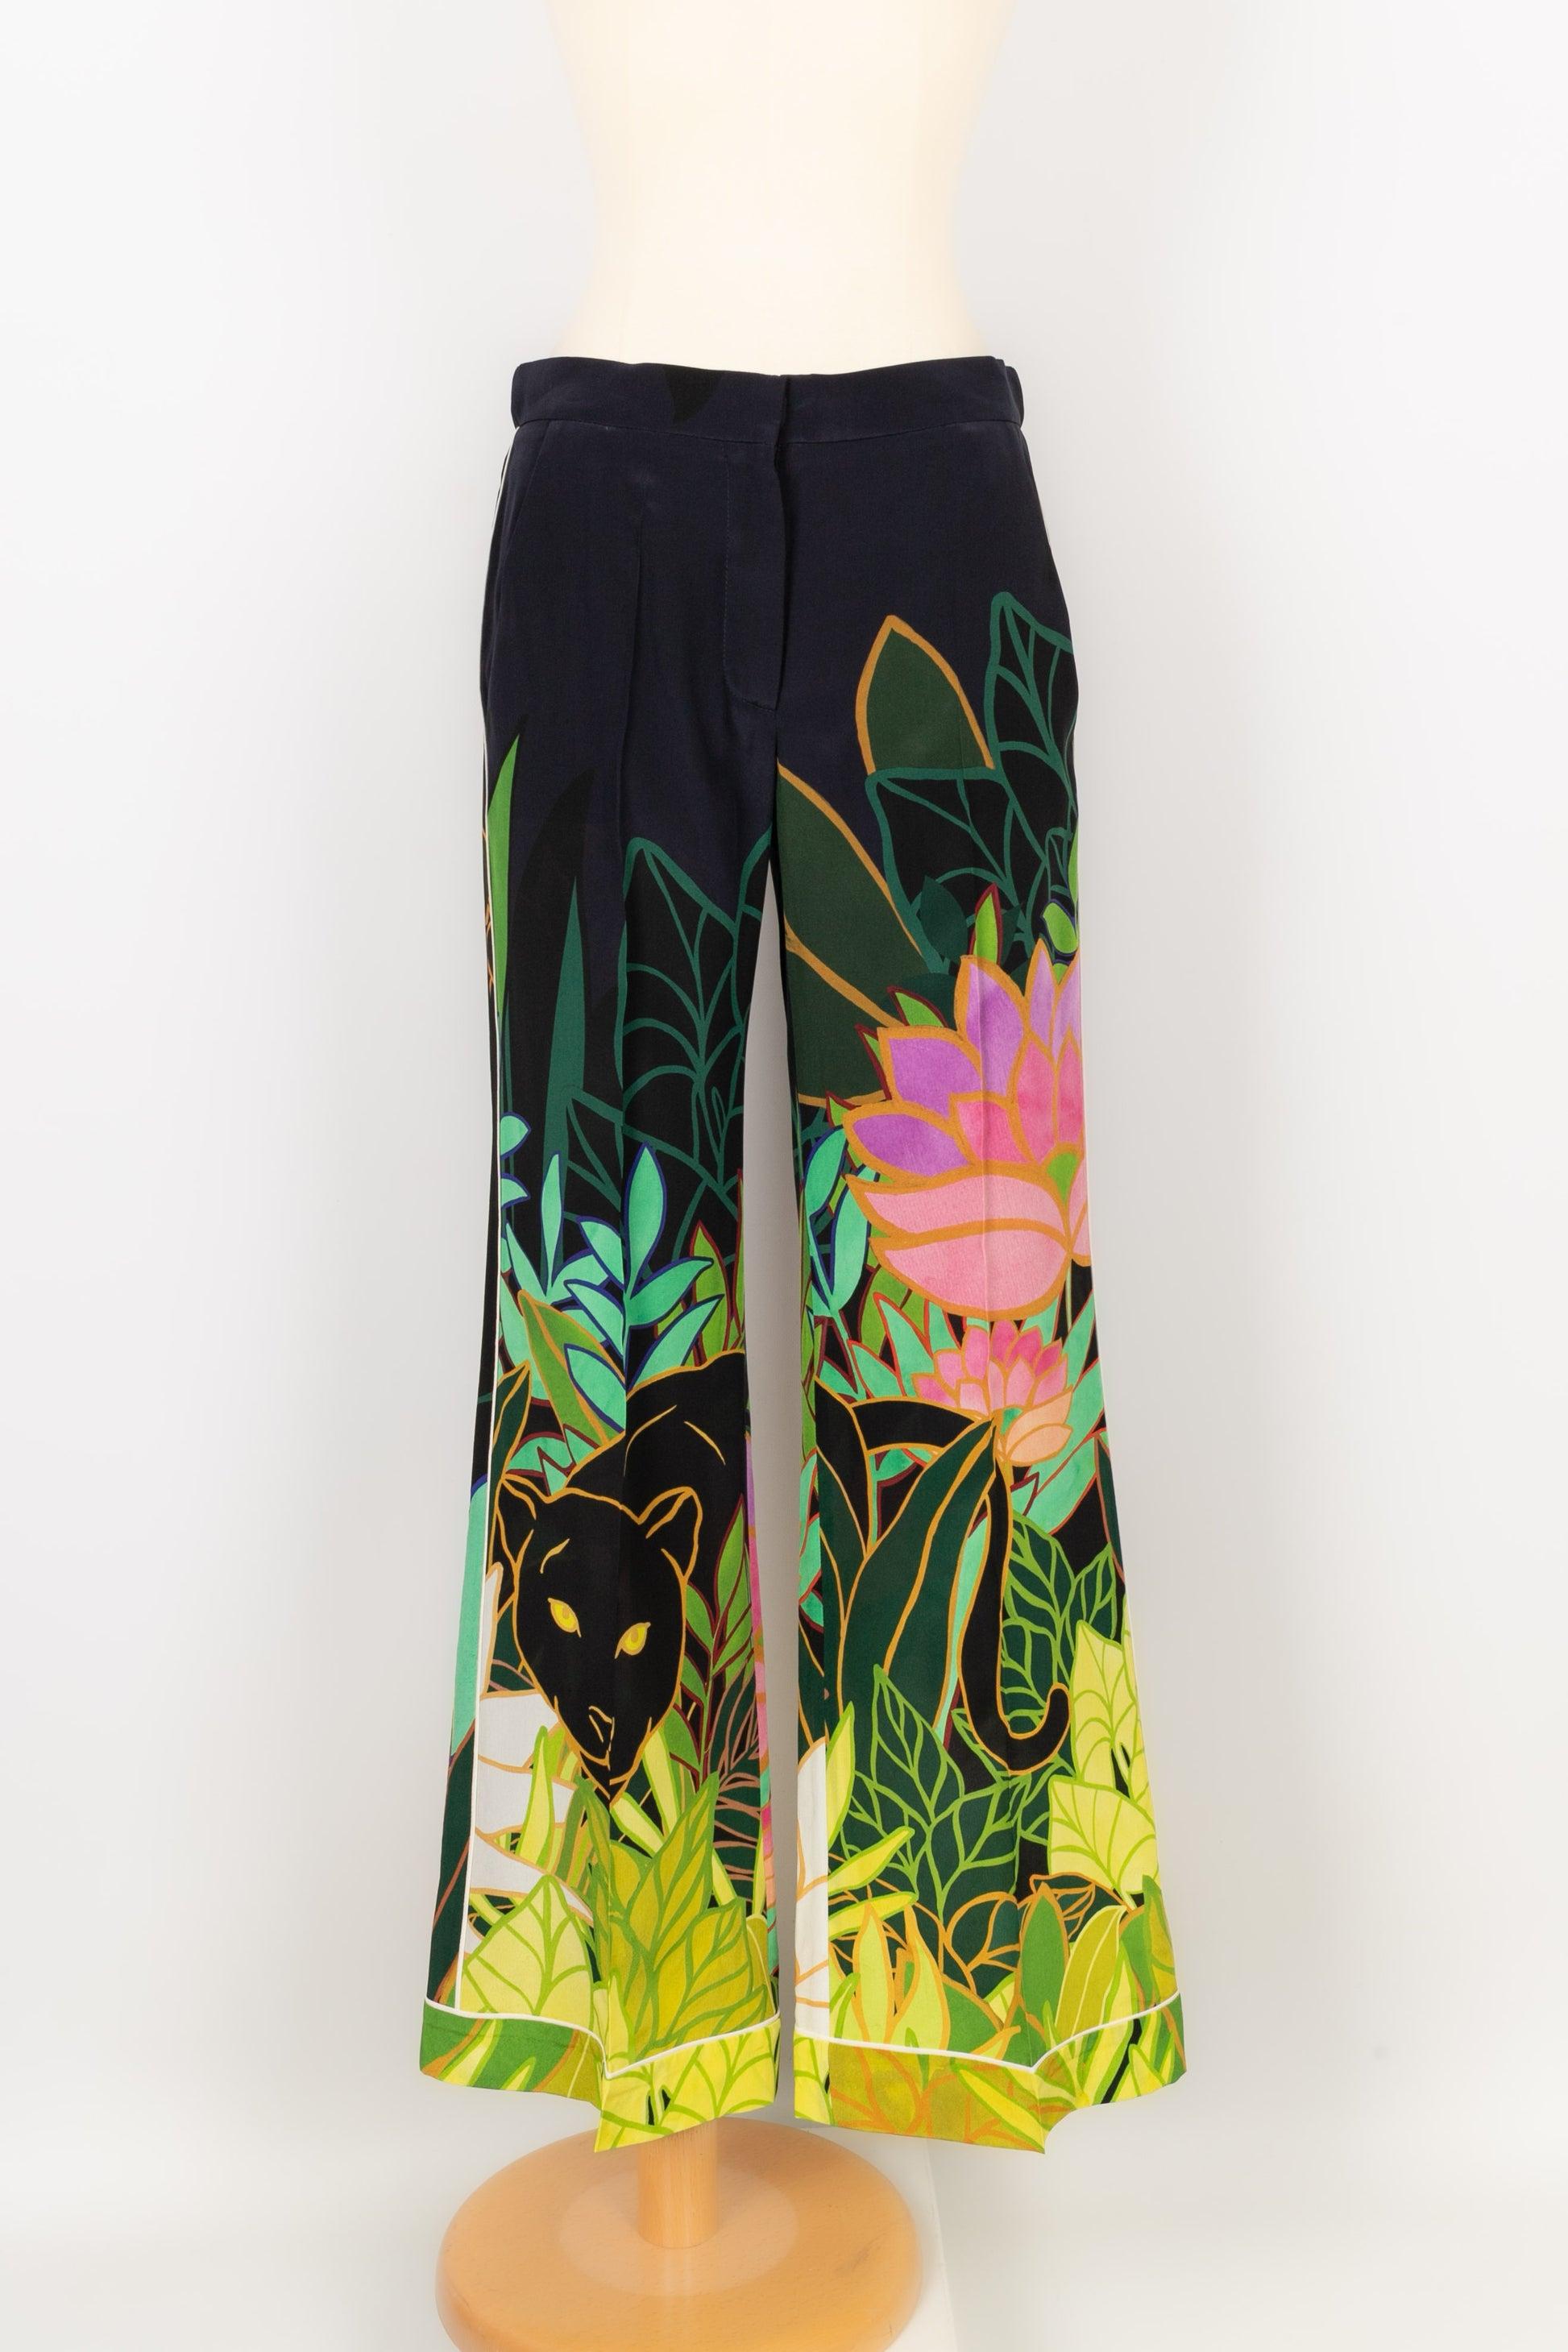 Black Valentino Silk Pants Printed with Flowers, 2020 For Sale